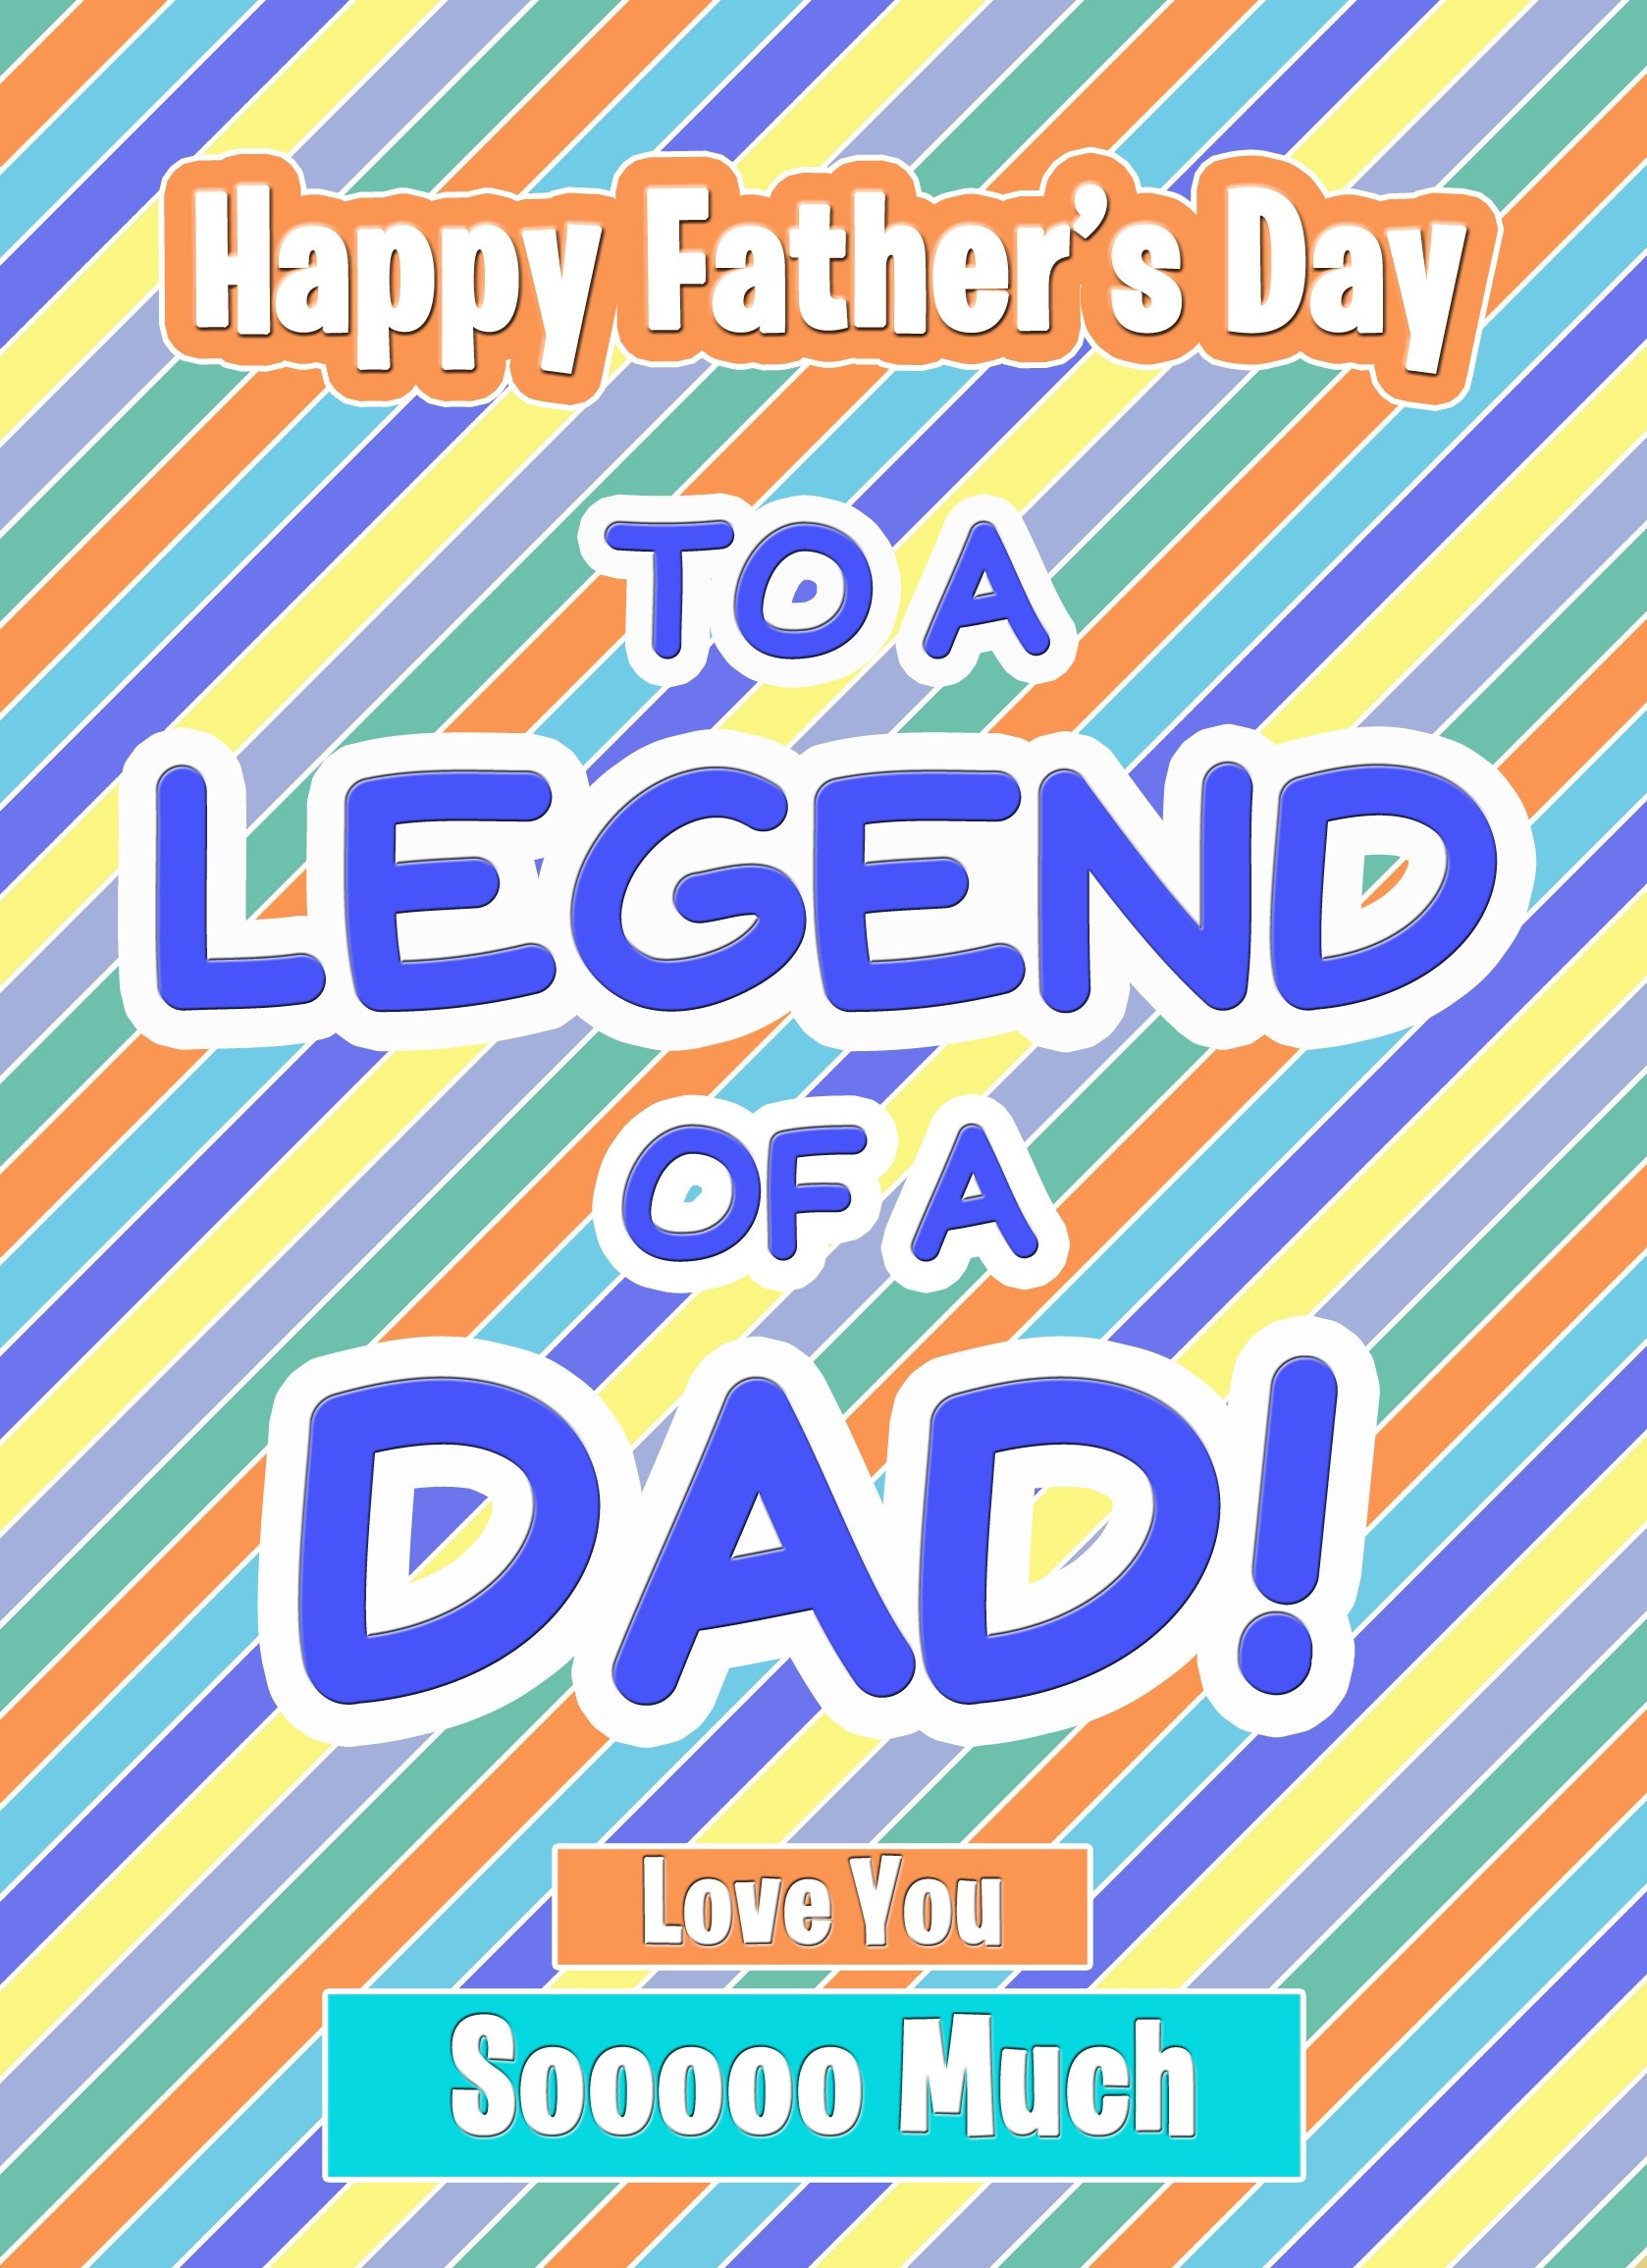 Fathers Day Card (Dad, Legend)